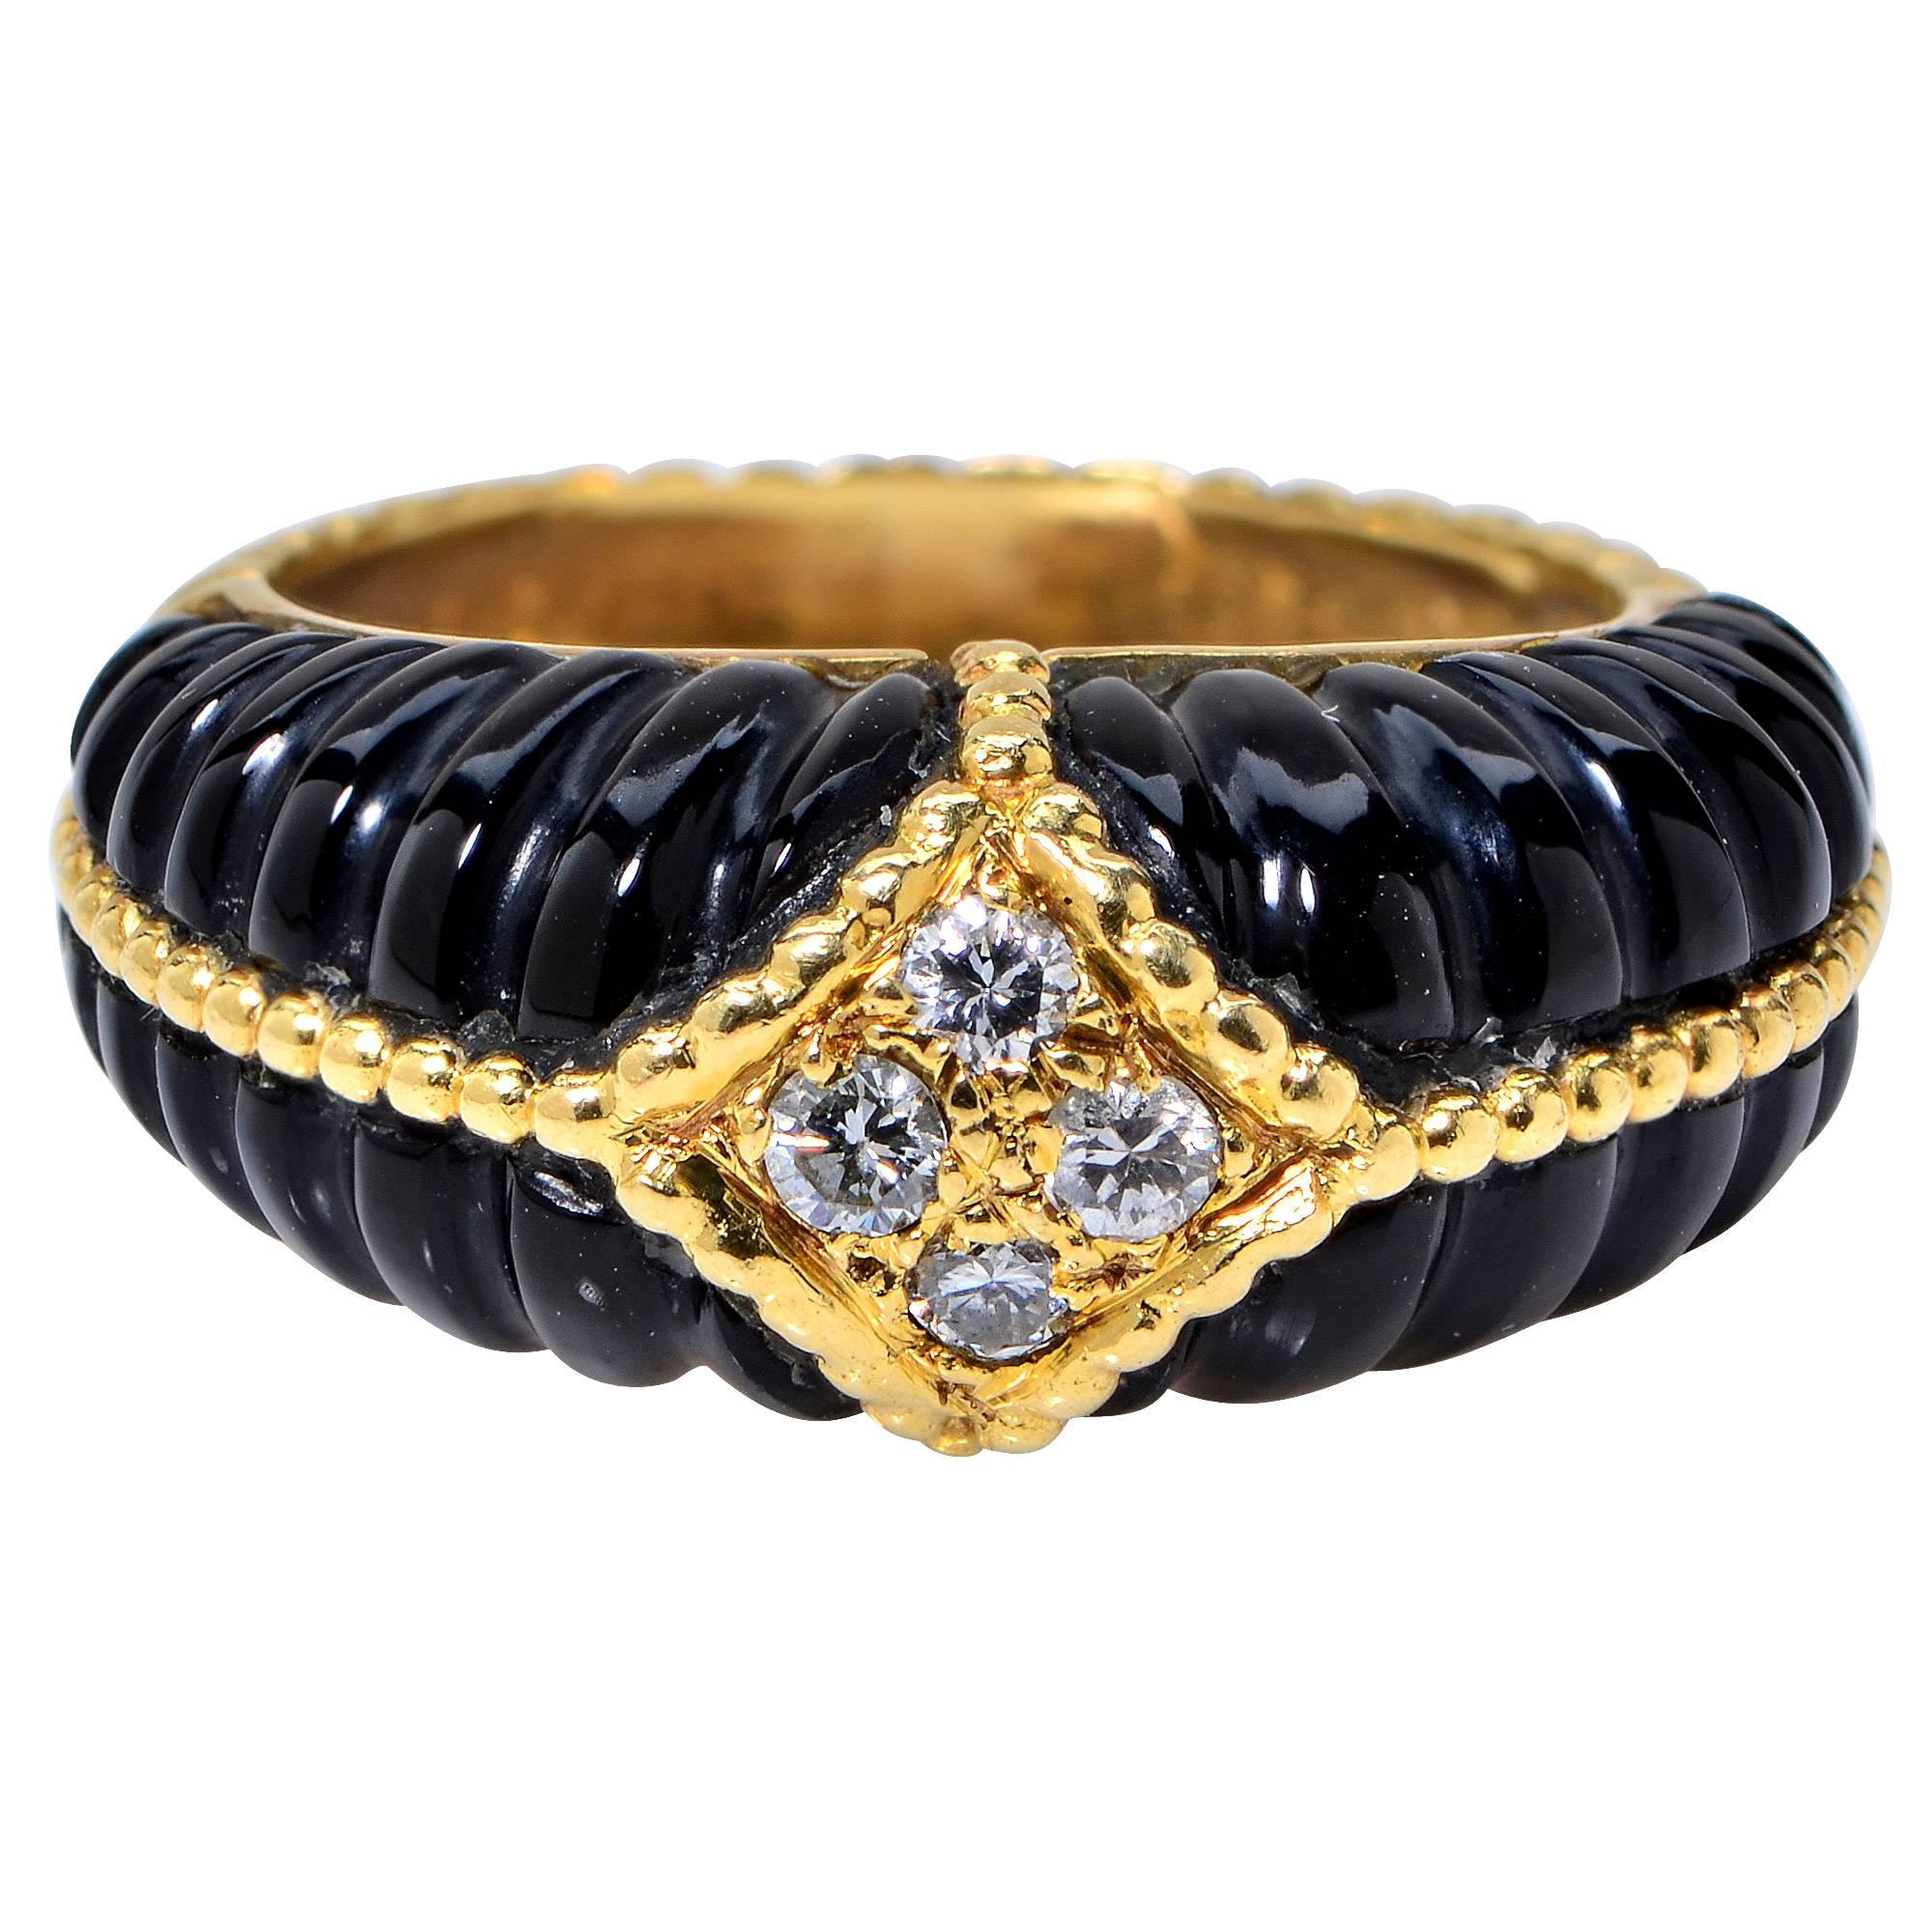 Van Cleef and Arpels 18 Karat Yellow Gold Onyx and Diamond Ring Featuring Four Round Brilliant Cut Diamonds with an Estimated Total Weight of .20 Carats.

Ring Size: 5.5

This Ring is Accompanied by a Retail Appraisal Performed by an Accredited